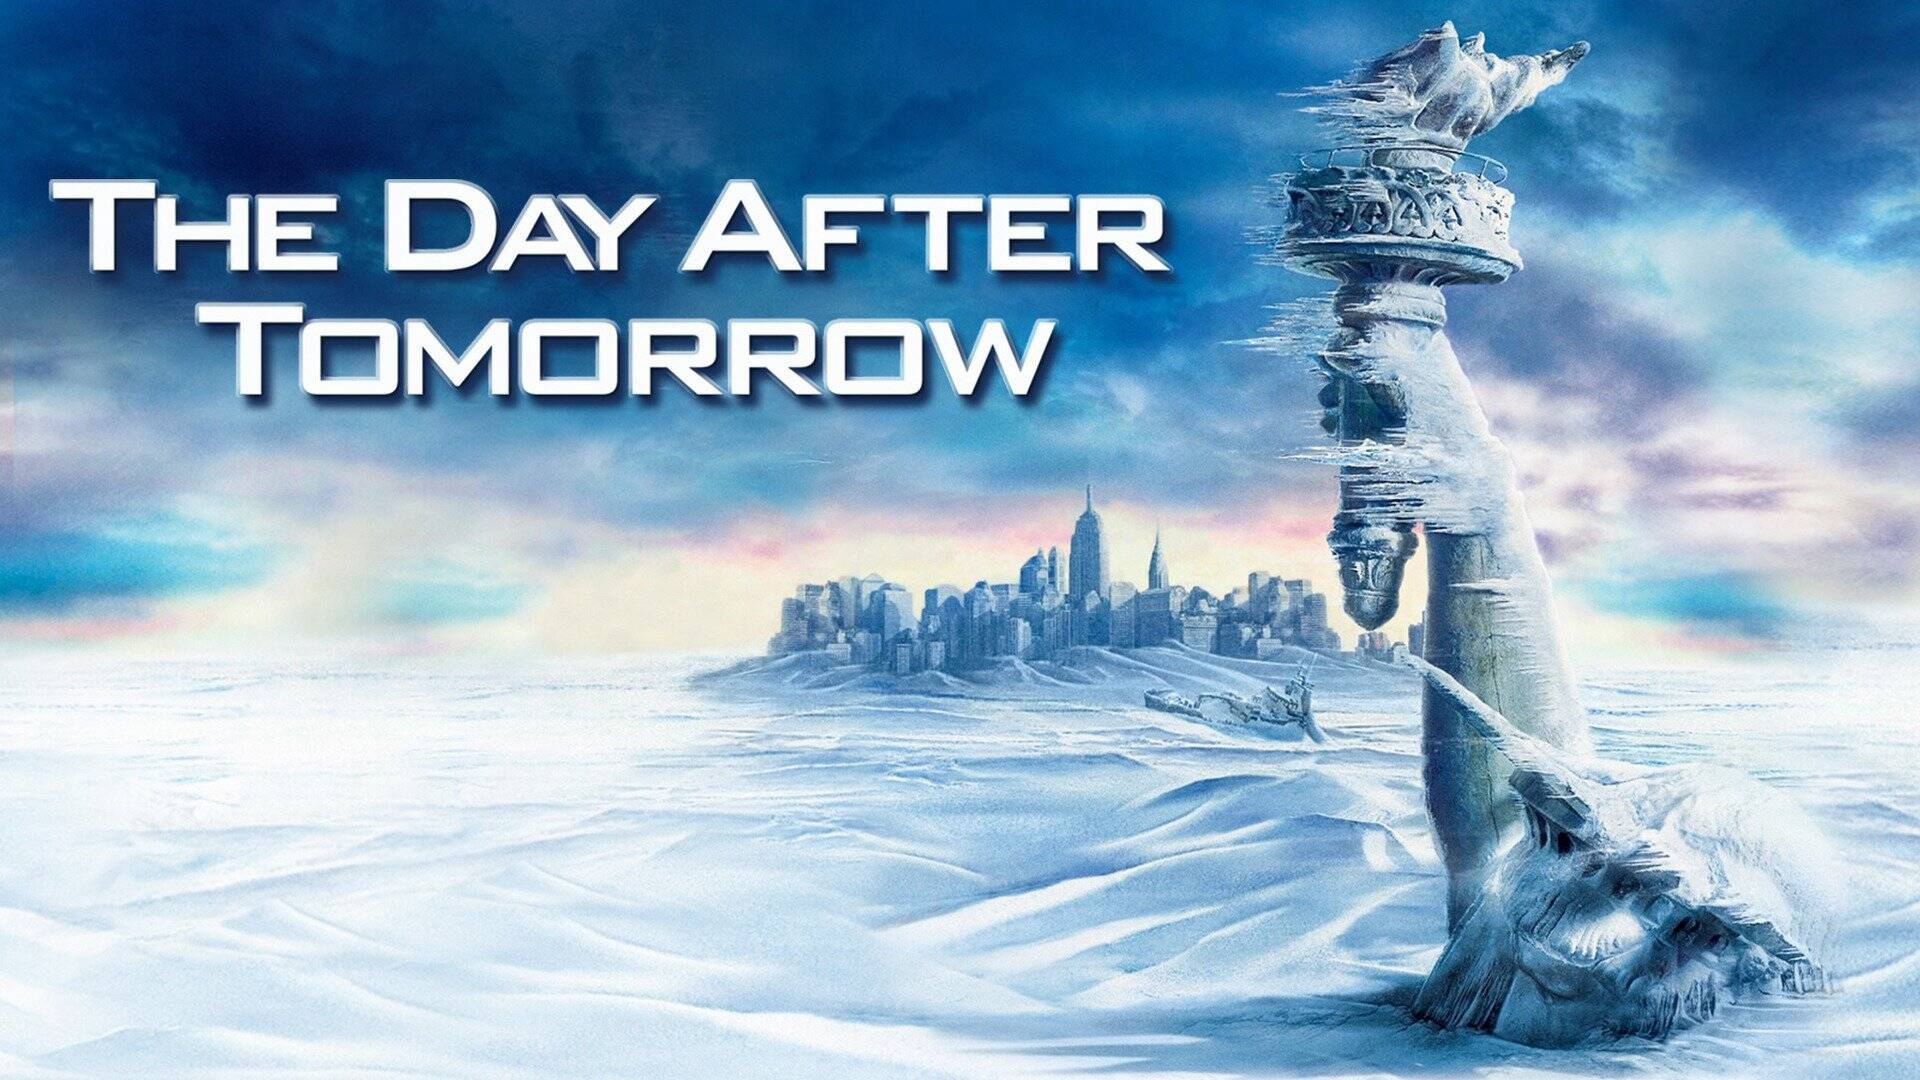 32 Facts about the movie The Day After Tomorrow - Facts.net